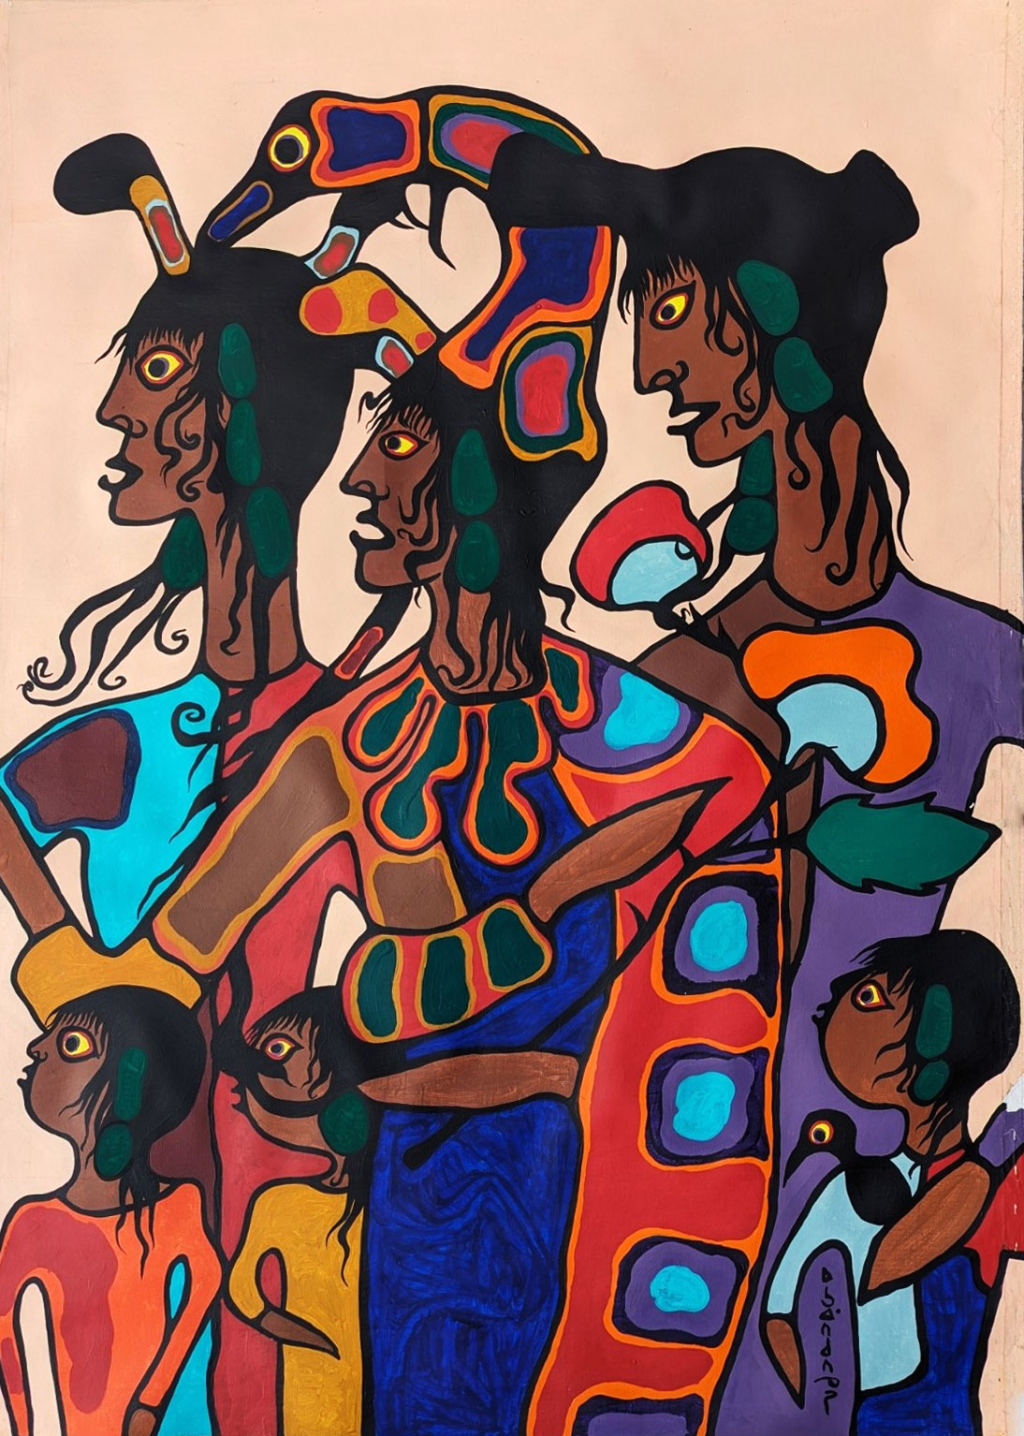 A portrait painting of Morrisseau, his wife and their children